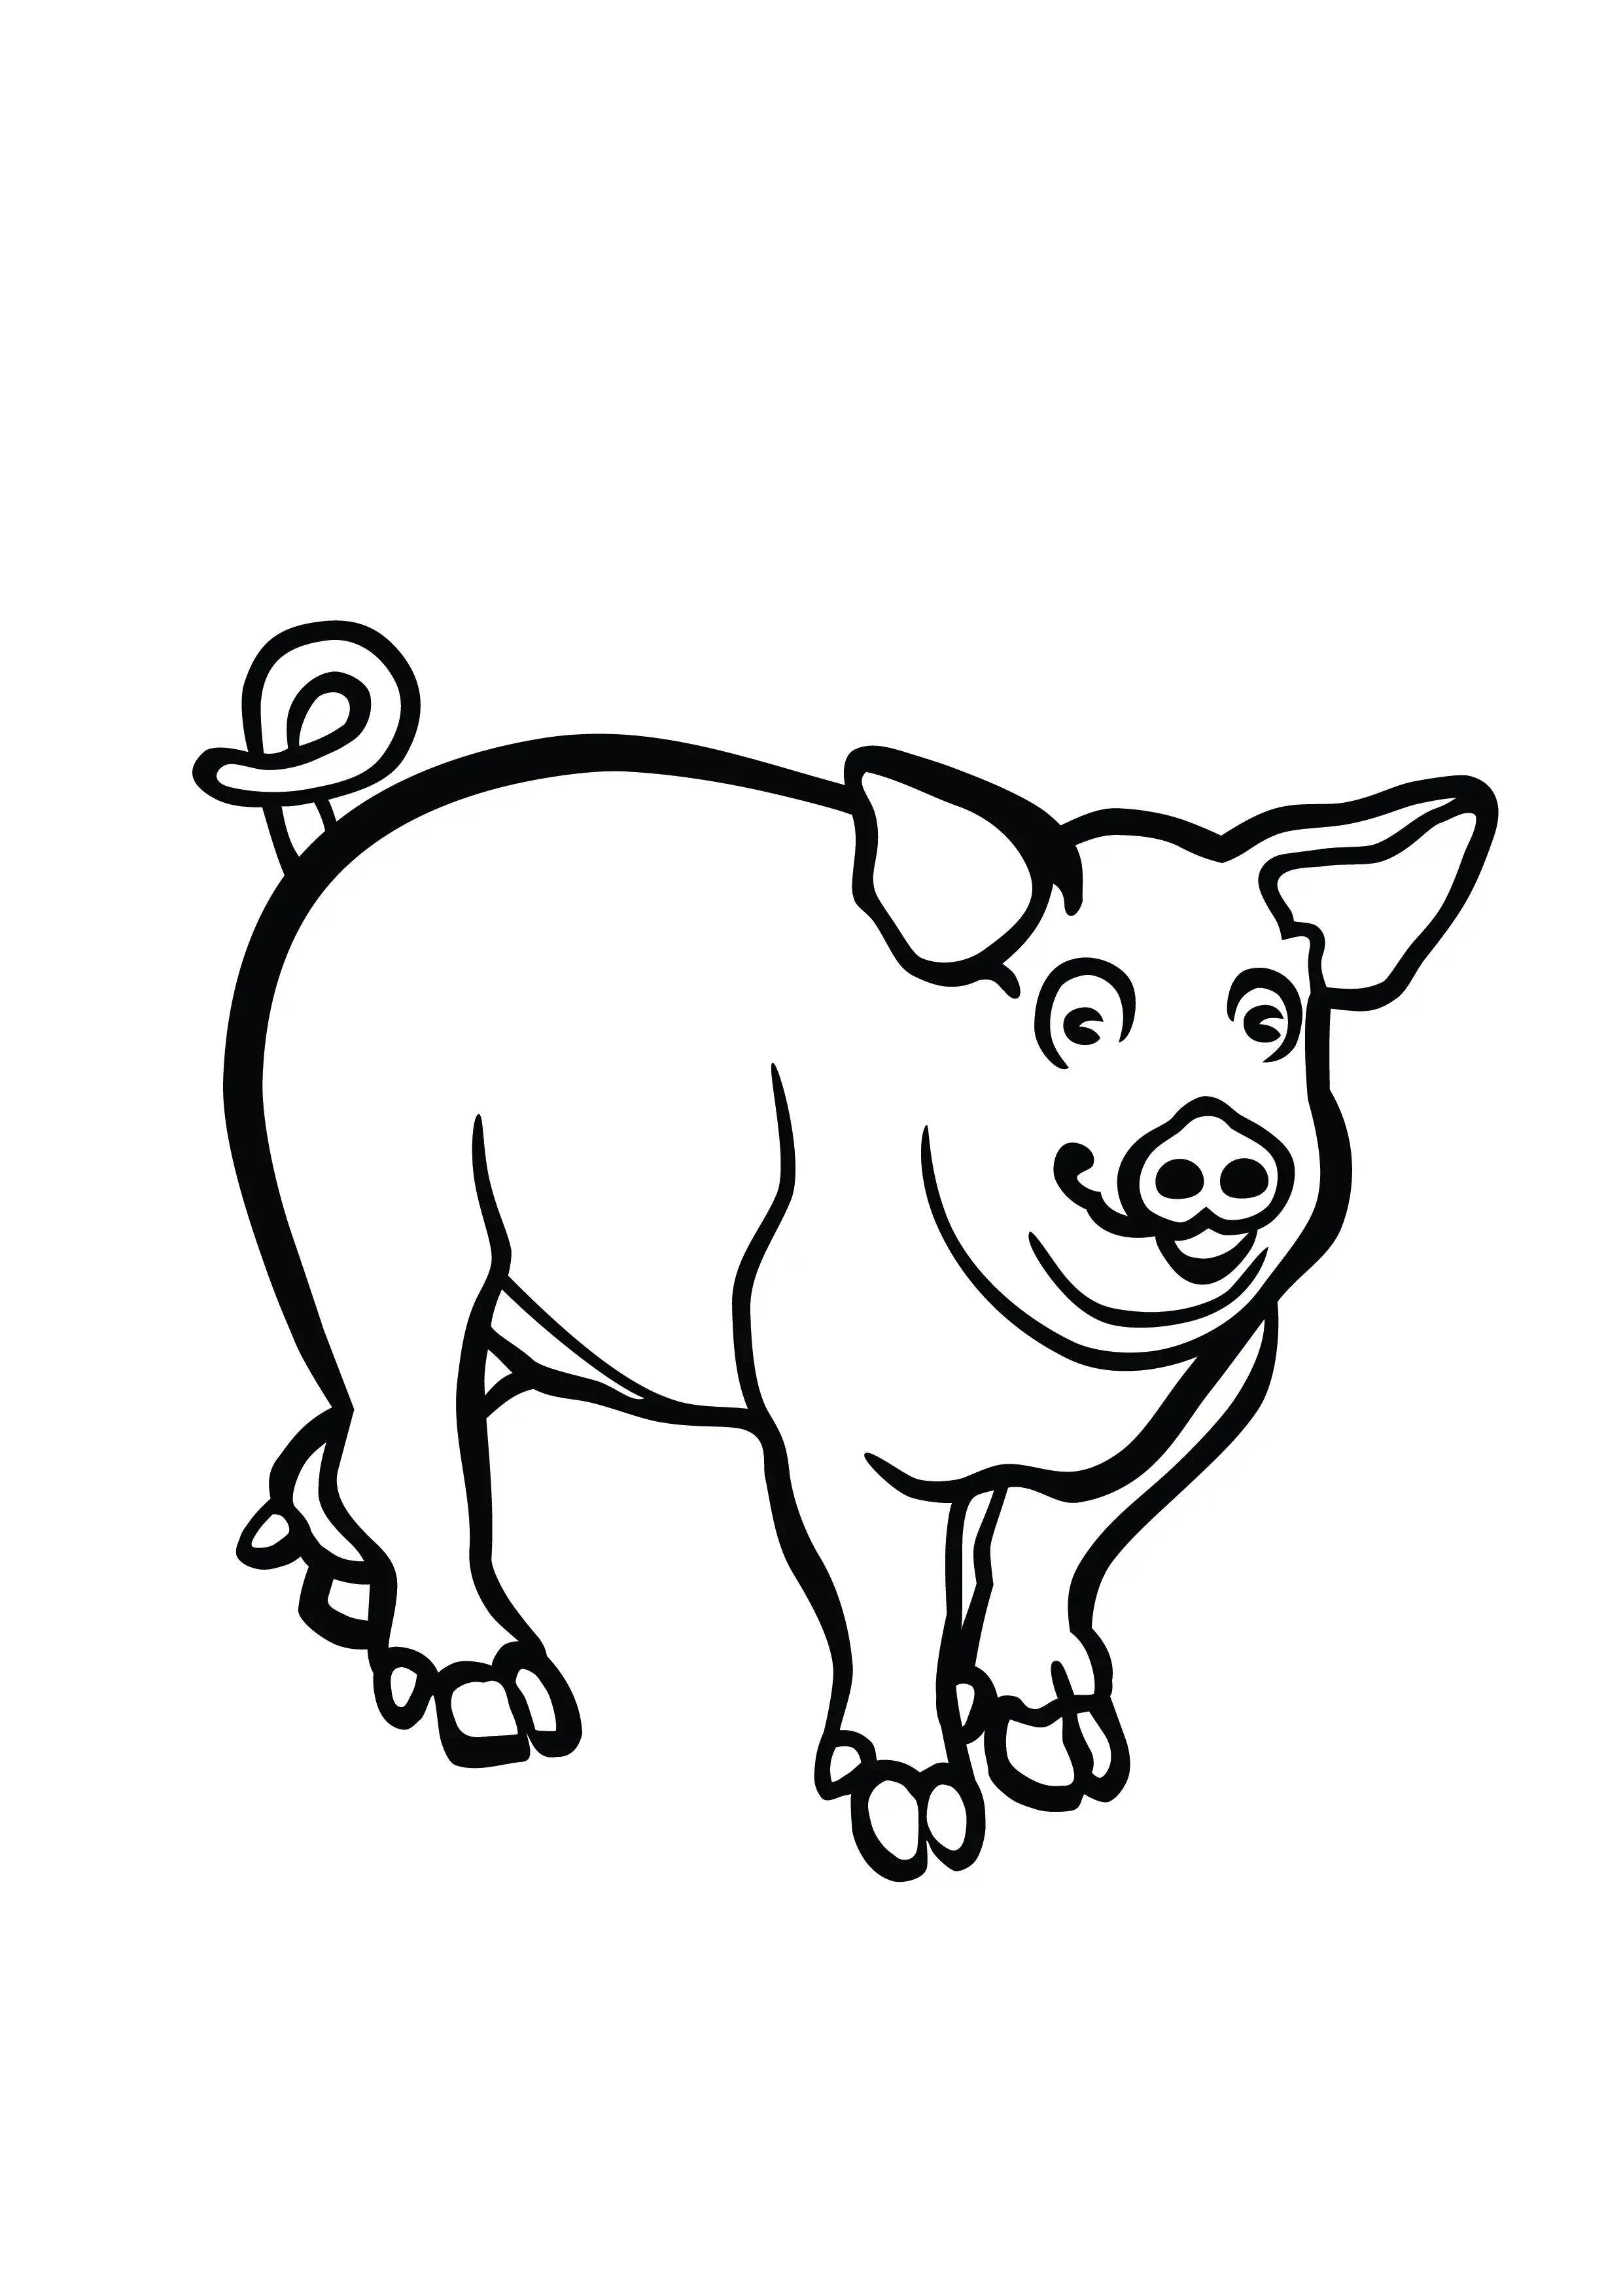 Farm Animal Pig-Cartoon-Free-Clipart-Line-Drawing-coloring-page-Activity-For-Kids